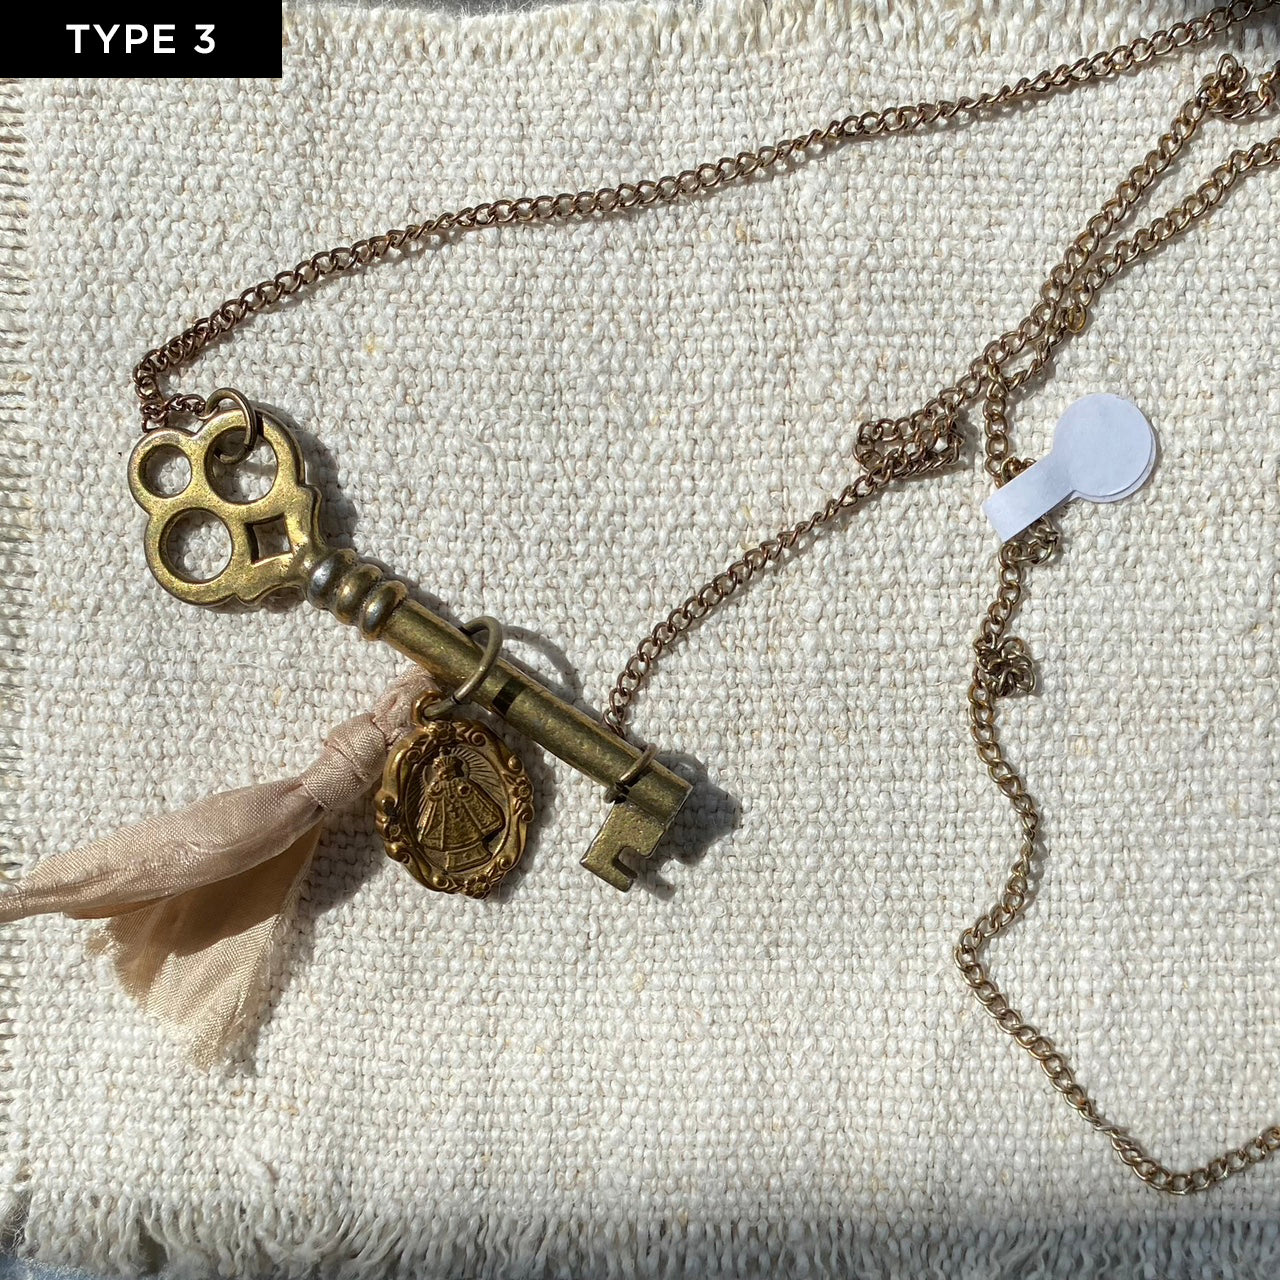 [REMAKE] Vintage necklace with chain